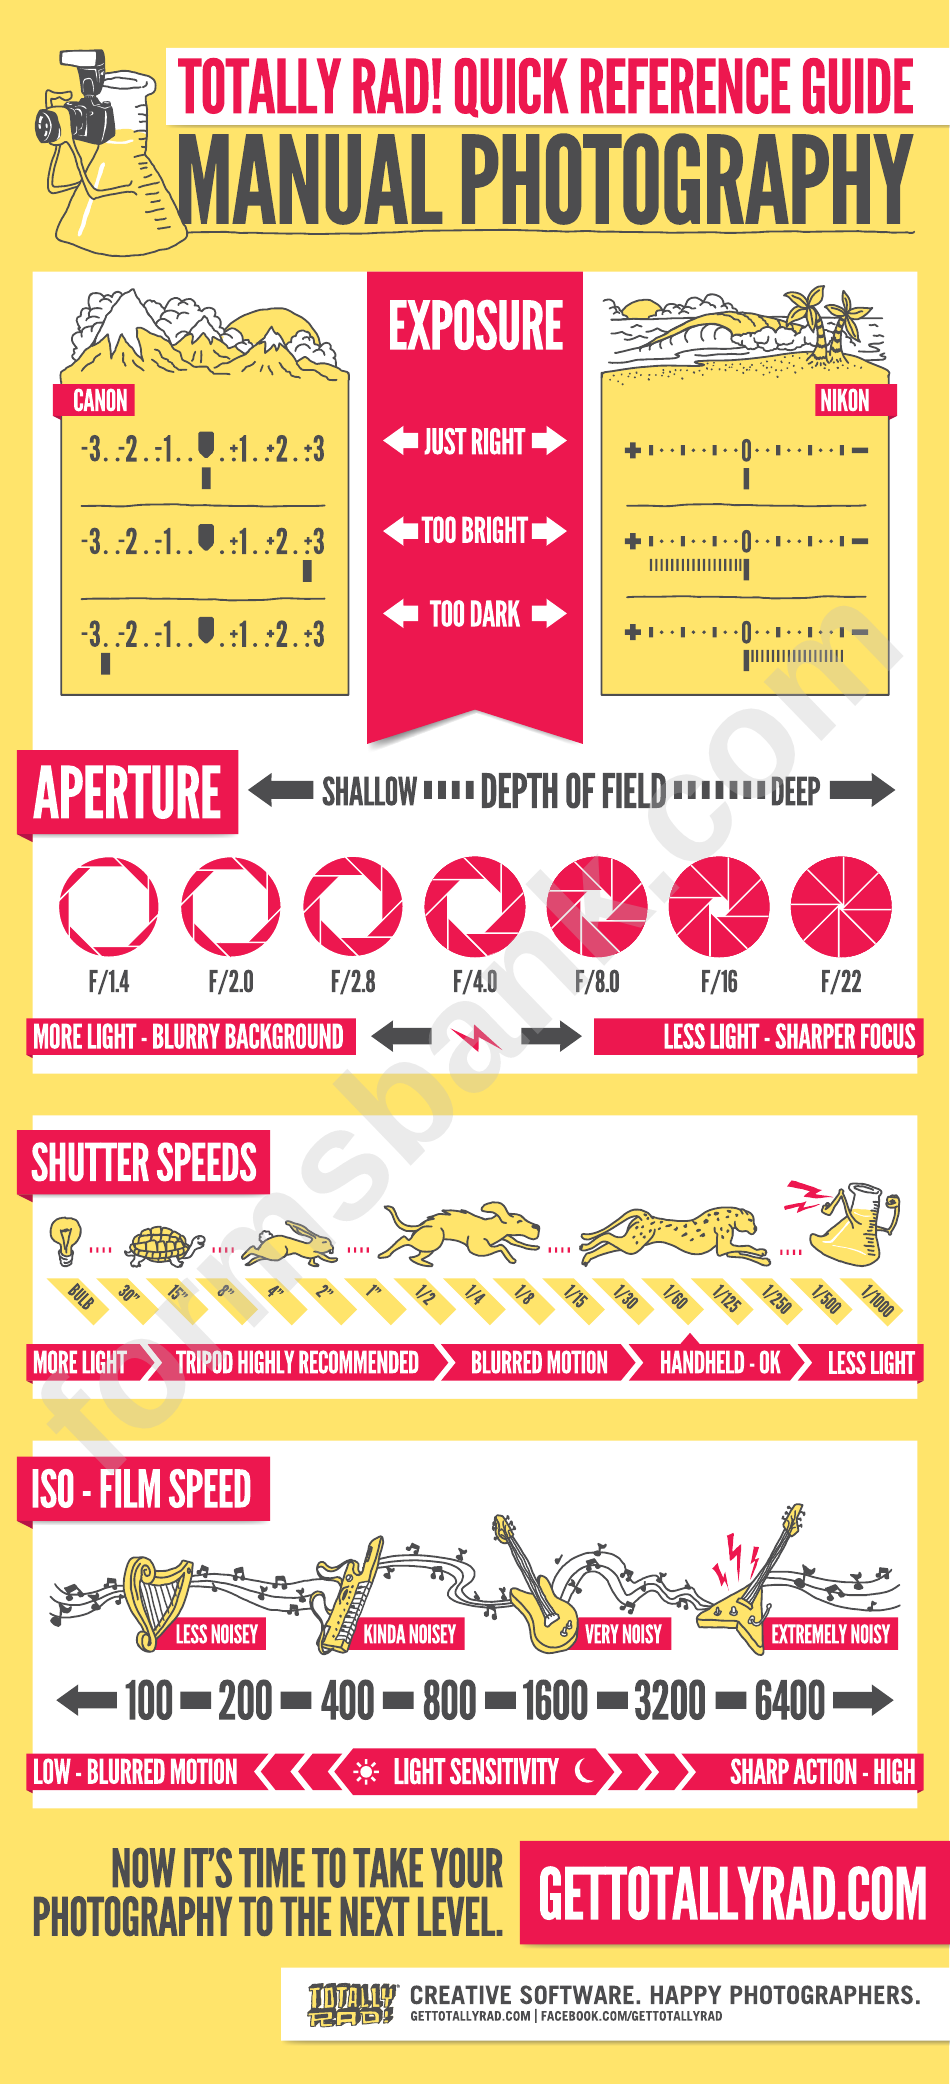 Manual Photography Quick Reference Guide